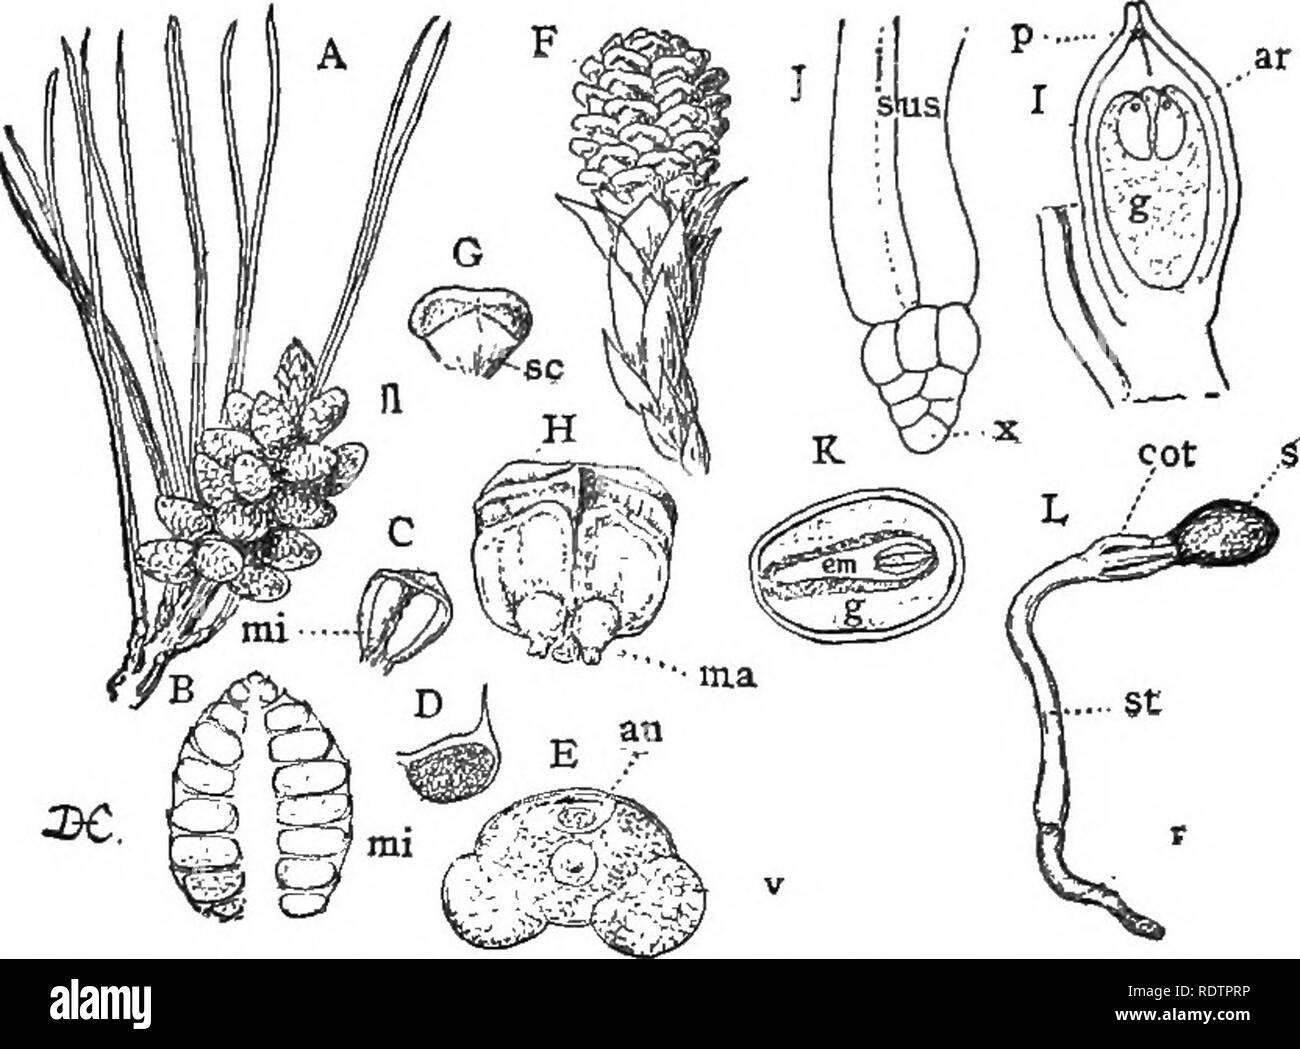 . Lectures on the evolution of plants. Botany; Plants. 170 EVOLUTION OF PLANTS pollen-spores produced is enormously in excess of the macrospores. Indeed, so abundant is the pollen, that the ground in the neighborhood of the trees is some-. FiG. 42 (ConiferEe). — A, branch of a pine (Pinus contorta) with male flowers, fl; B, longitudinal section of a single flower, showing the arrangement of the sporophylls; C, a single sporophyll, showing the two microsporangia, mi, upon its lower surface; D, a section through the microsporangium; E, a single microspore, showing the antheridium, an, and the ve Stock Photo